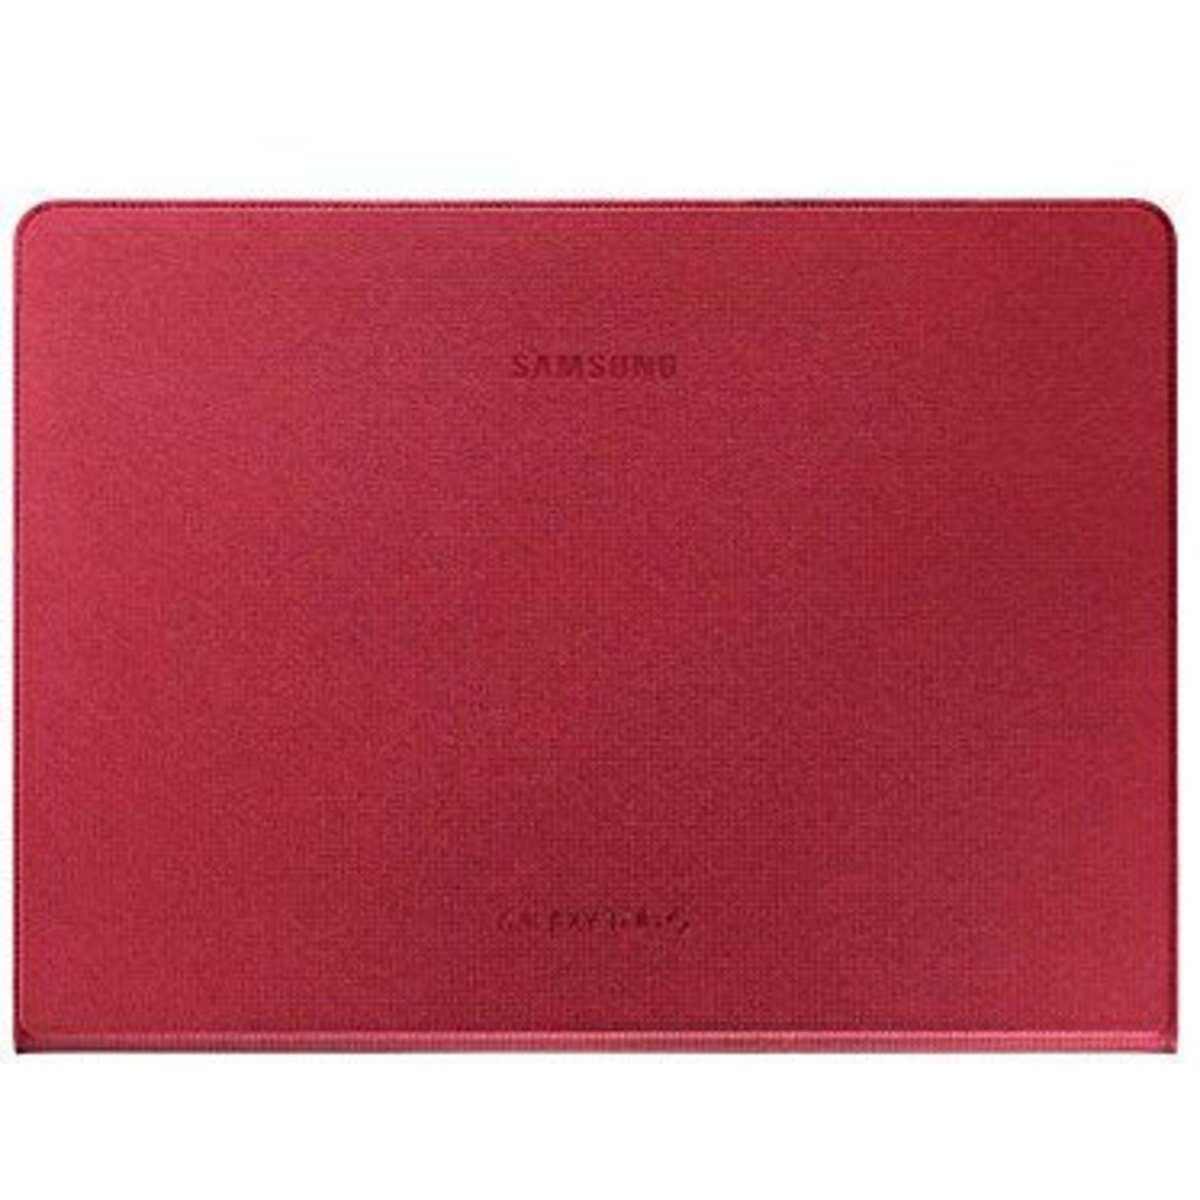 SAMSUNG Accessoire tablette tactile SIMPLE COVER GALAXY TAB S 10